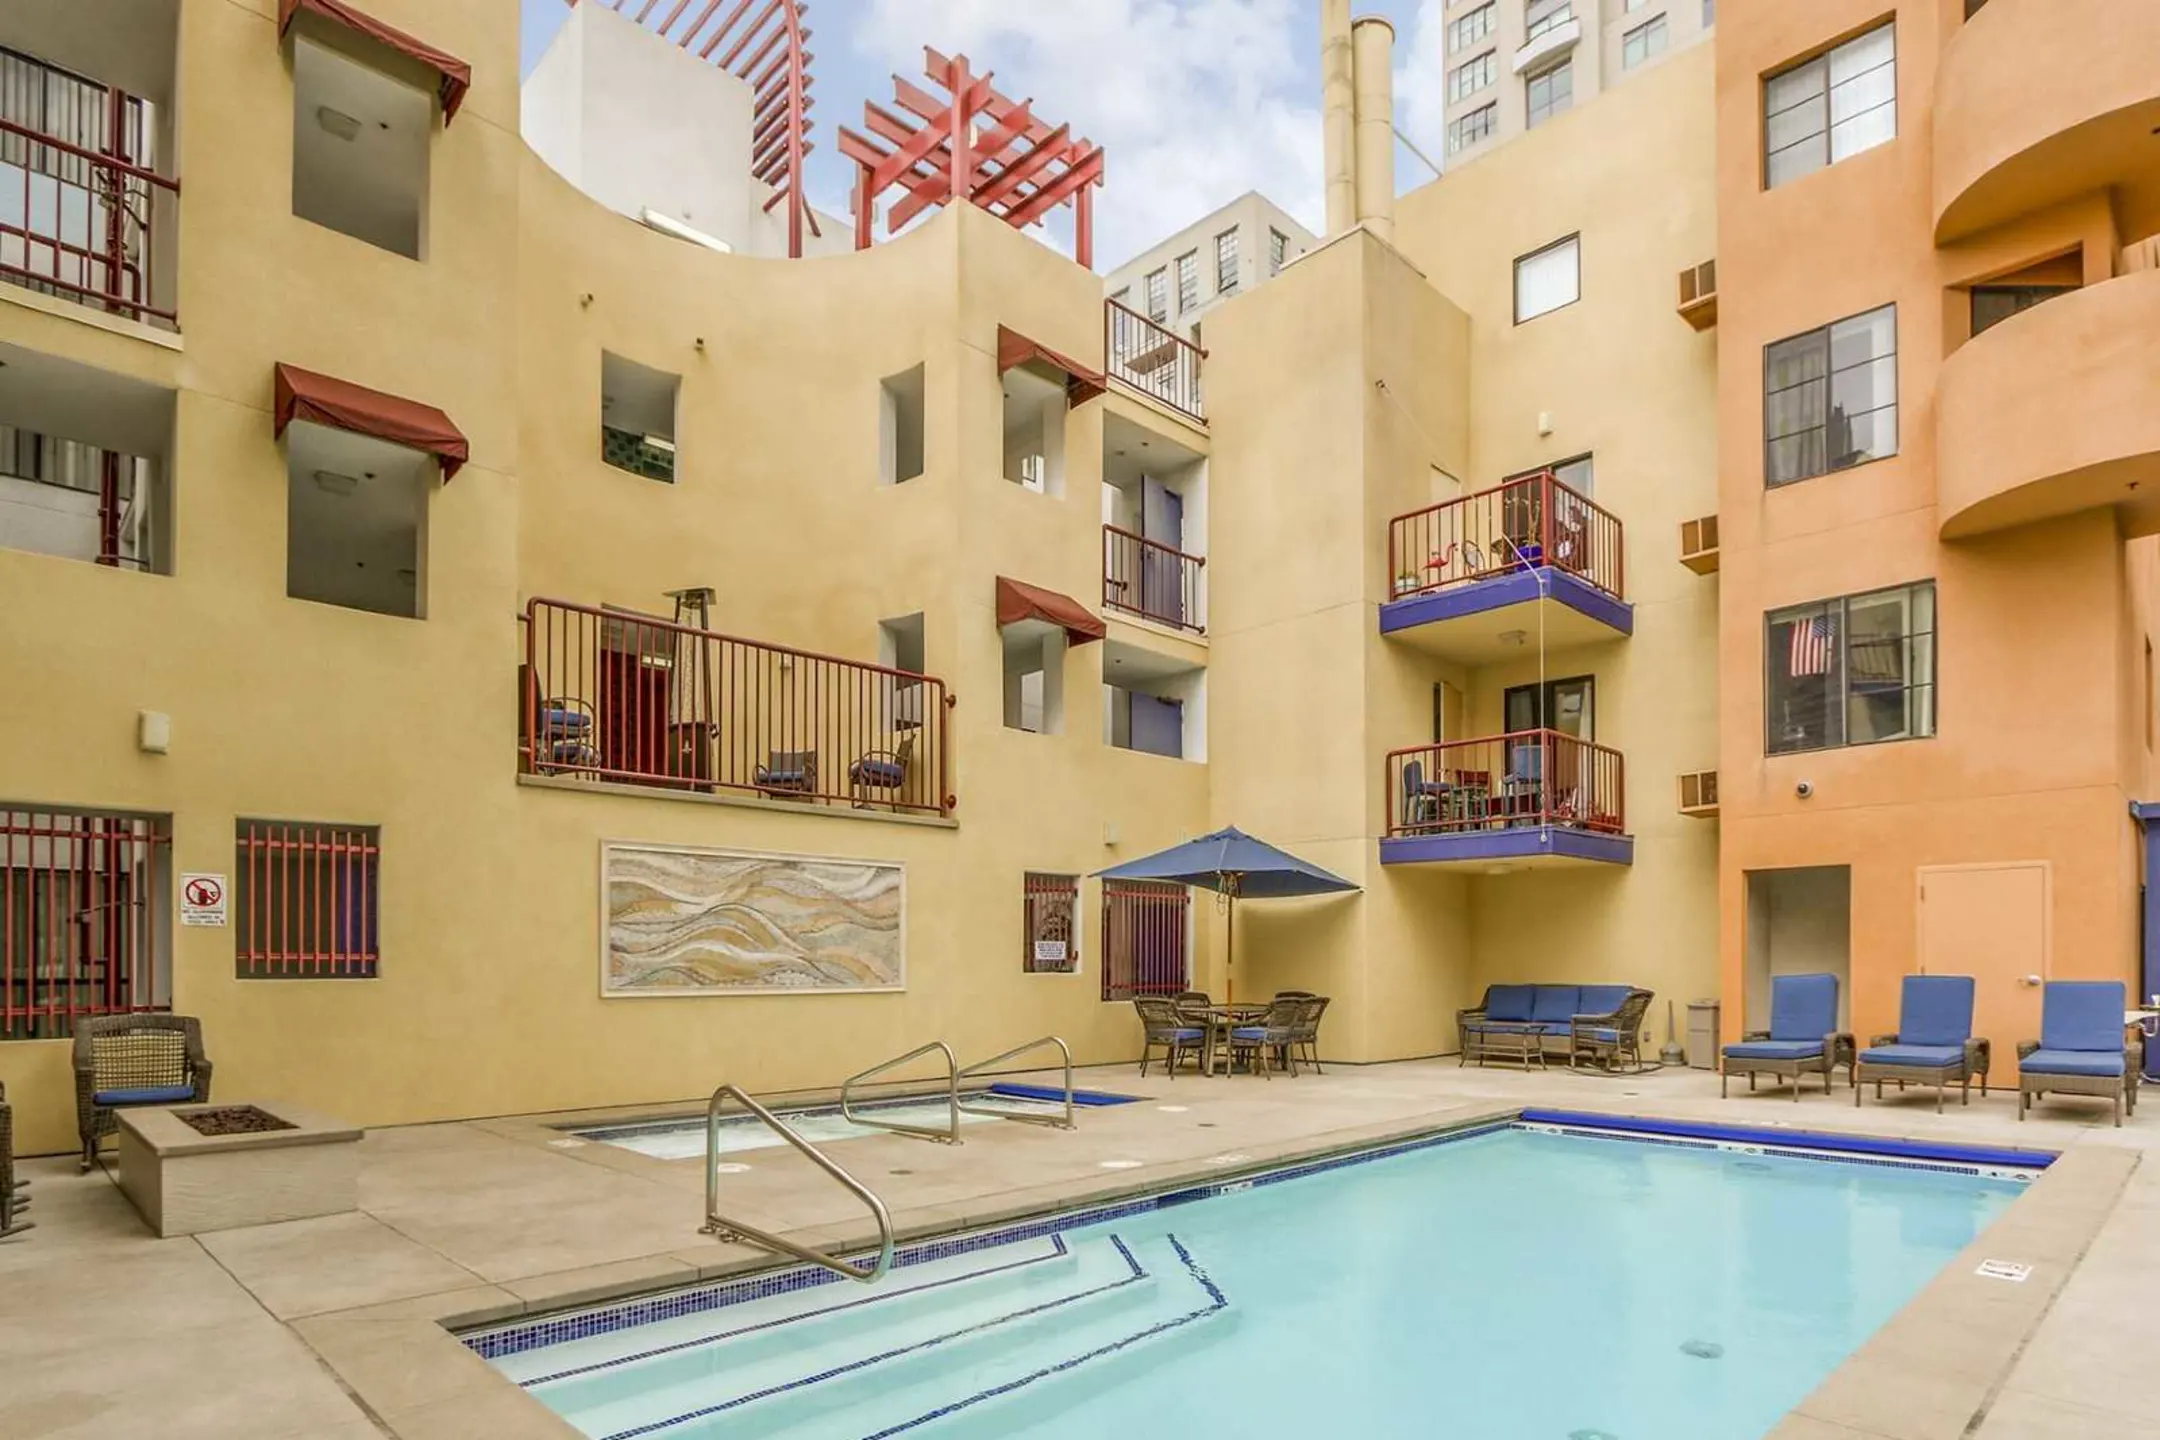 Pool - 600 Front Apartments - San Diego, CA